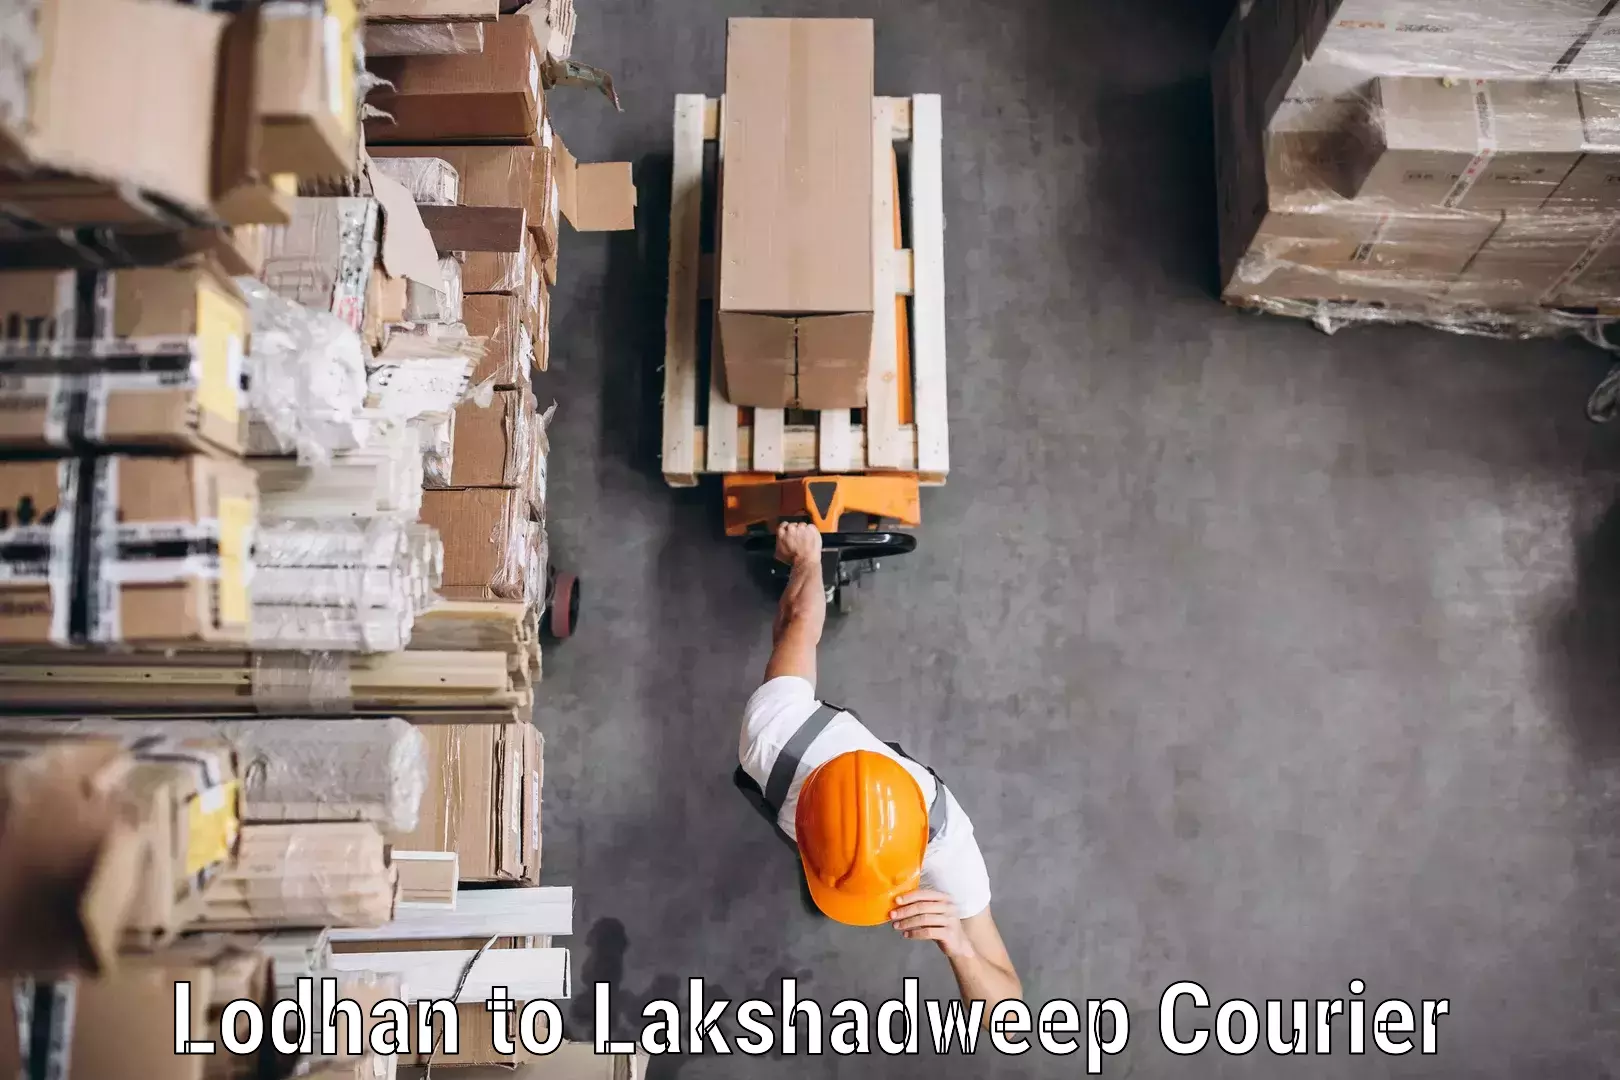 Customer-friendly courier services Lodhan to Lakshadweep